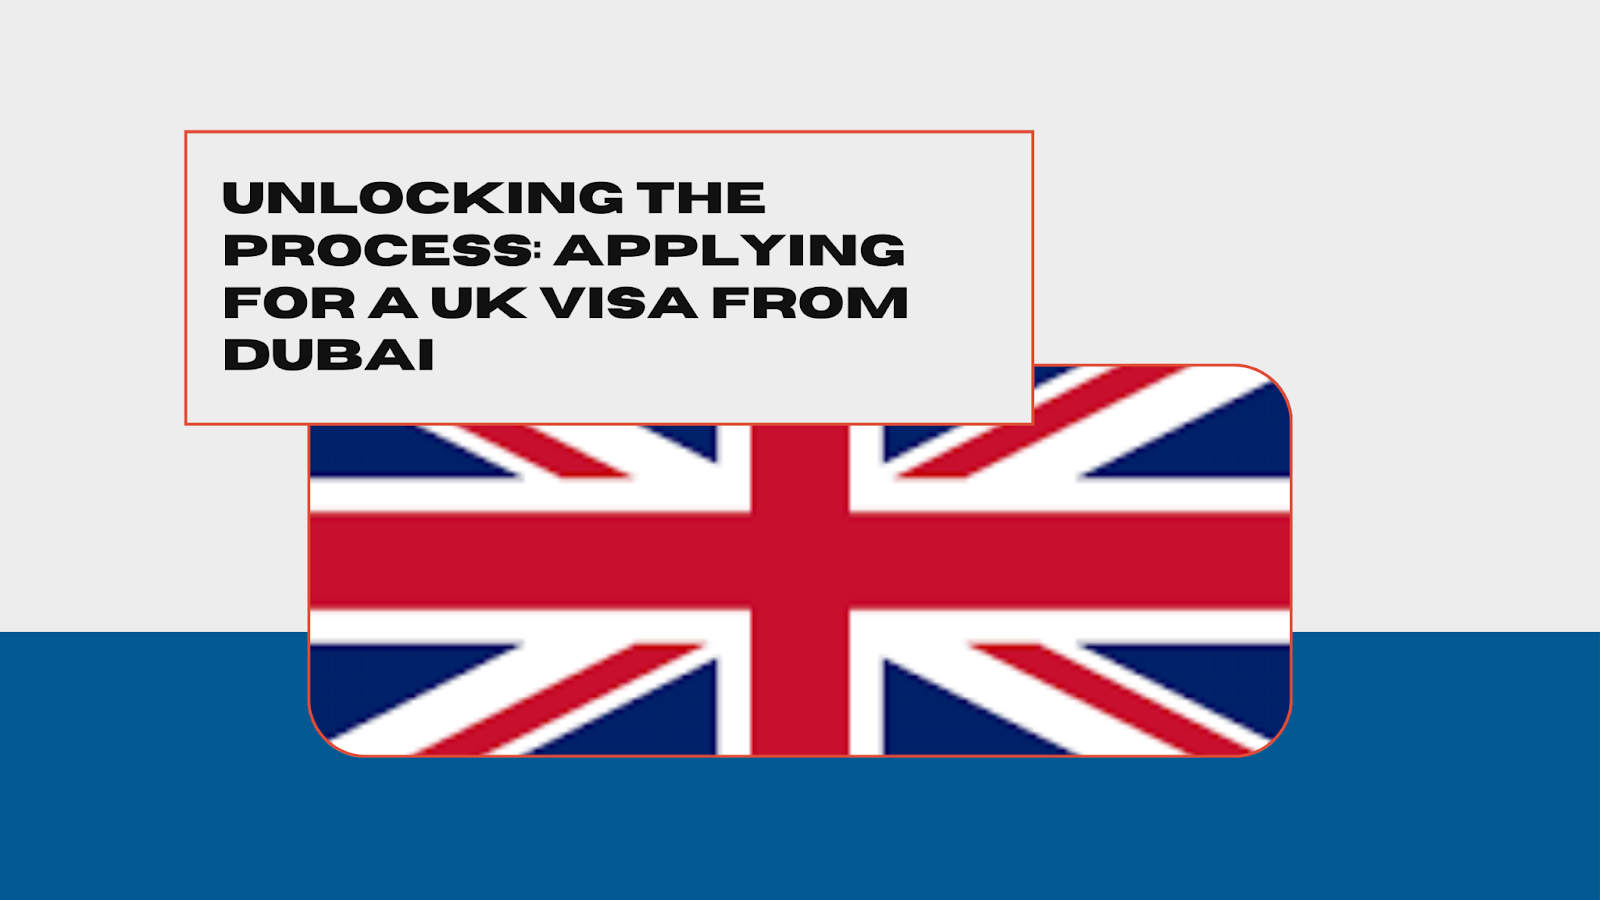 The Ultimate Guide to Applying for a UK Visa from Dubai